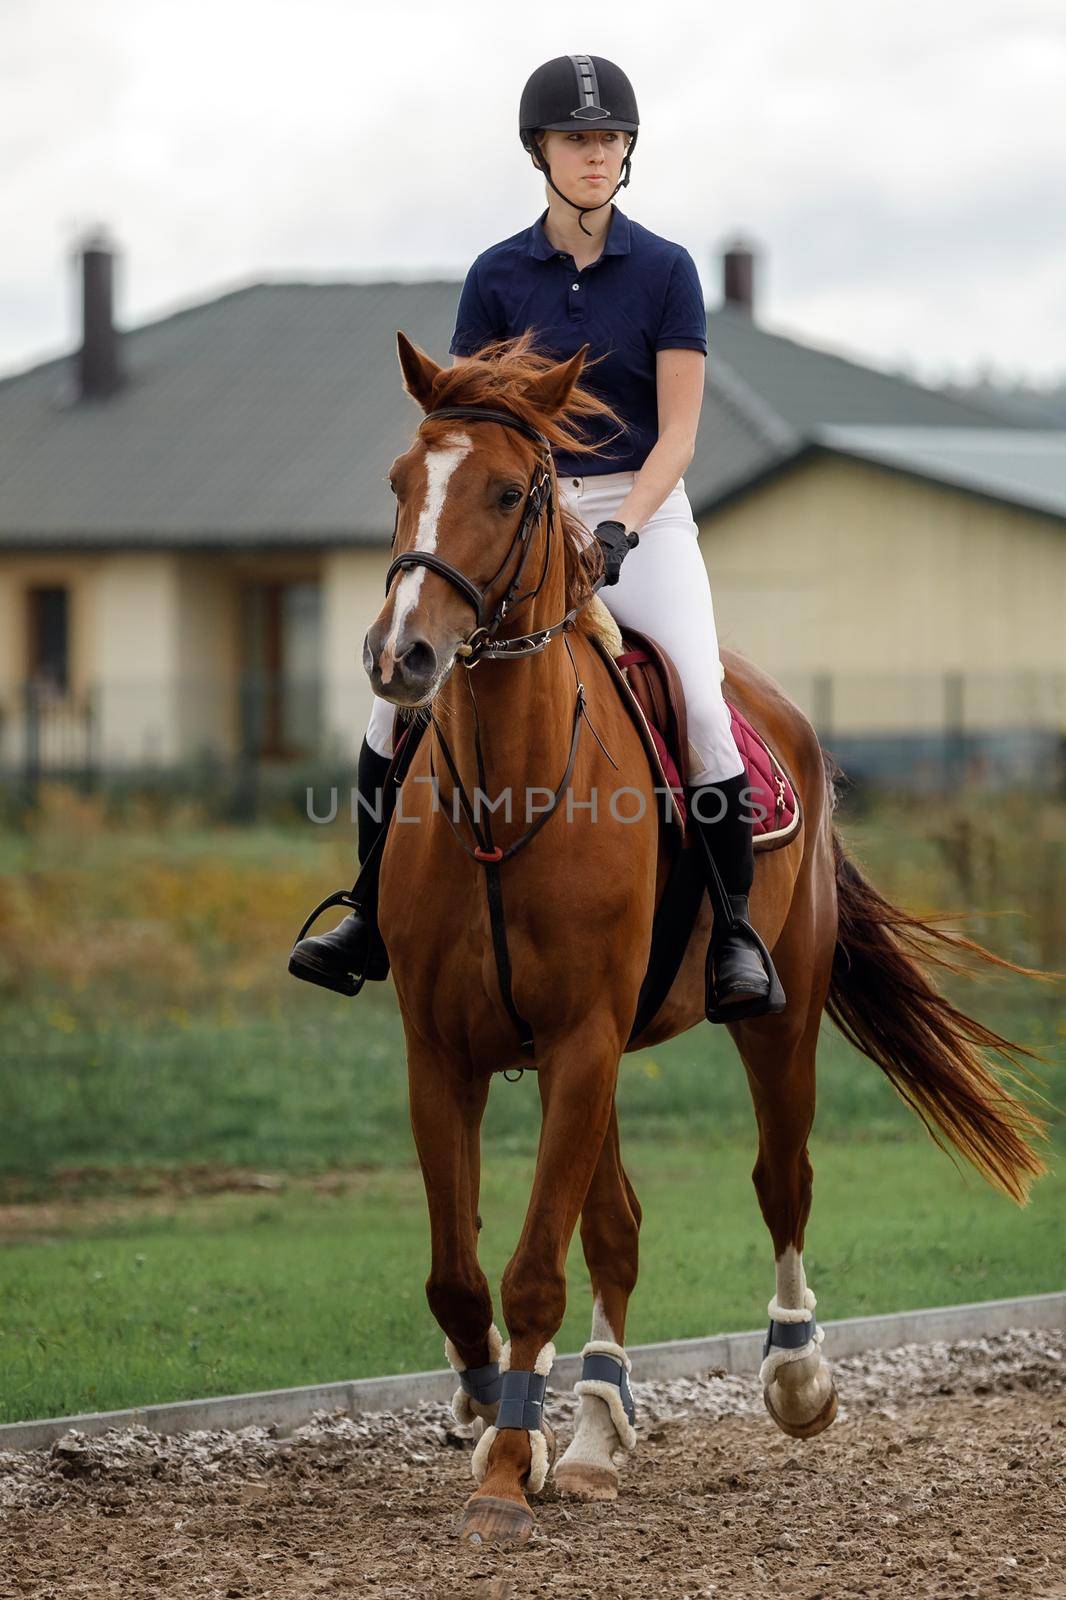 A young and pretty girl is learning to ride a thoroughbred Mare on a summer day at the ranch. Horse riding, training and rehabilitation by Lincikas